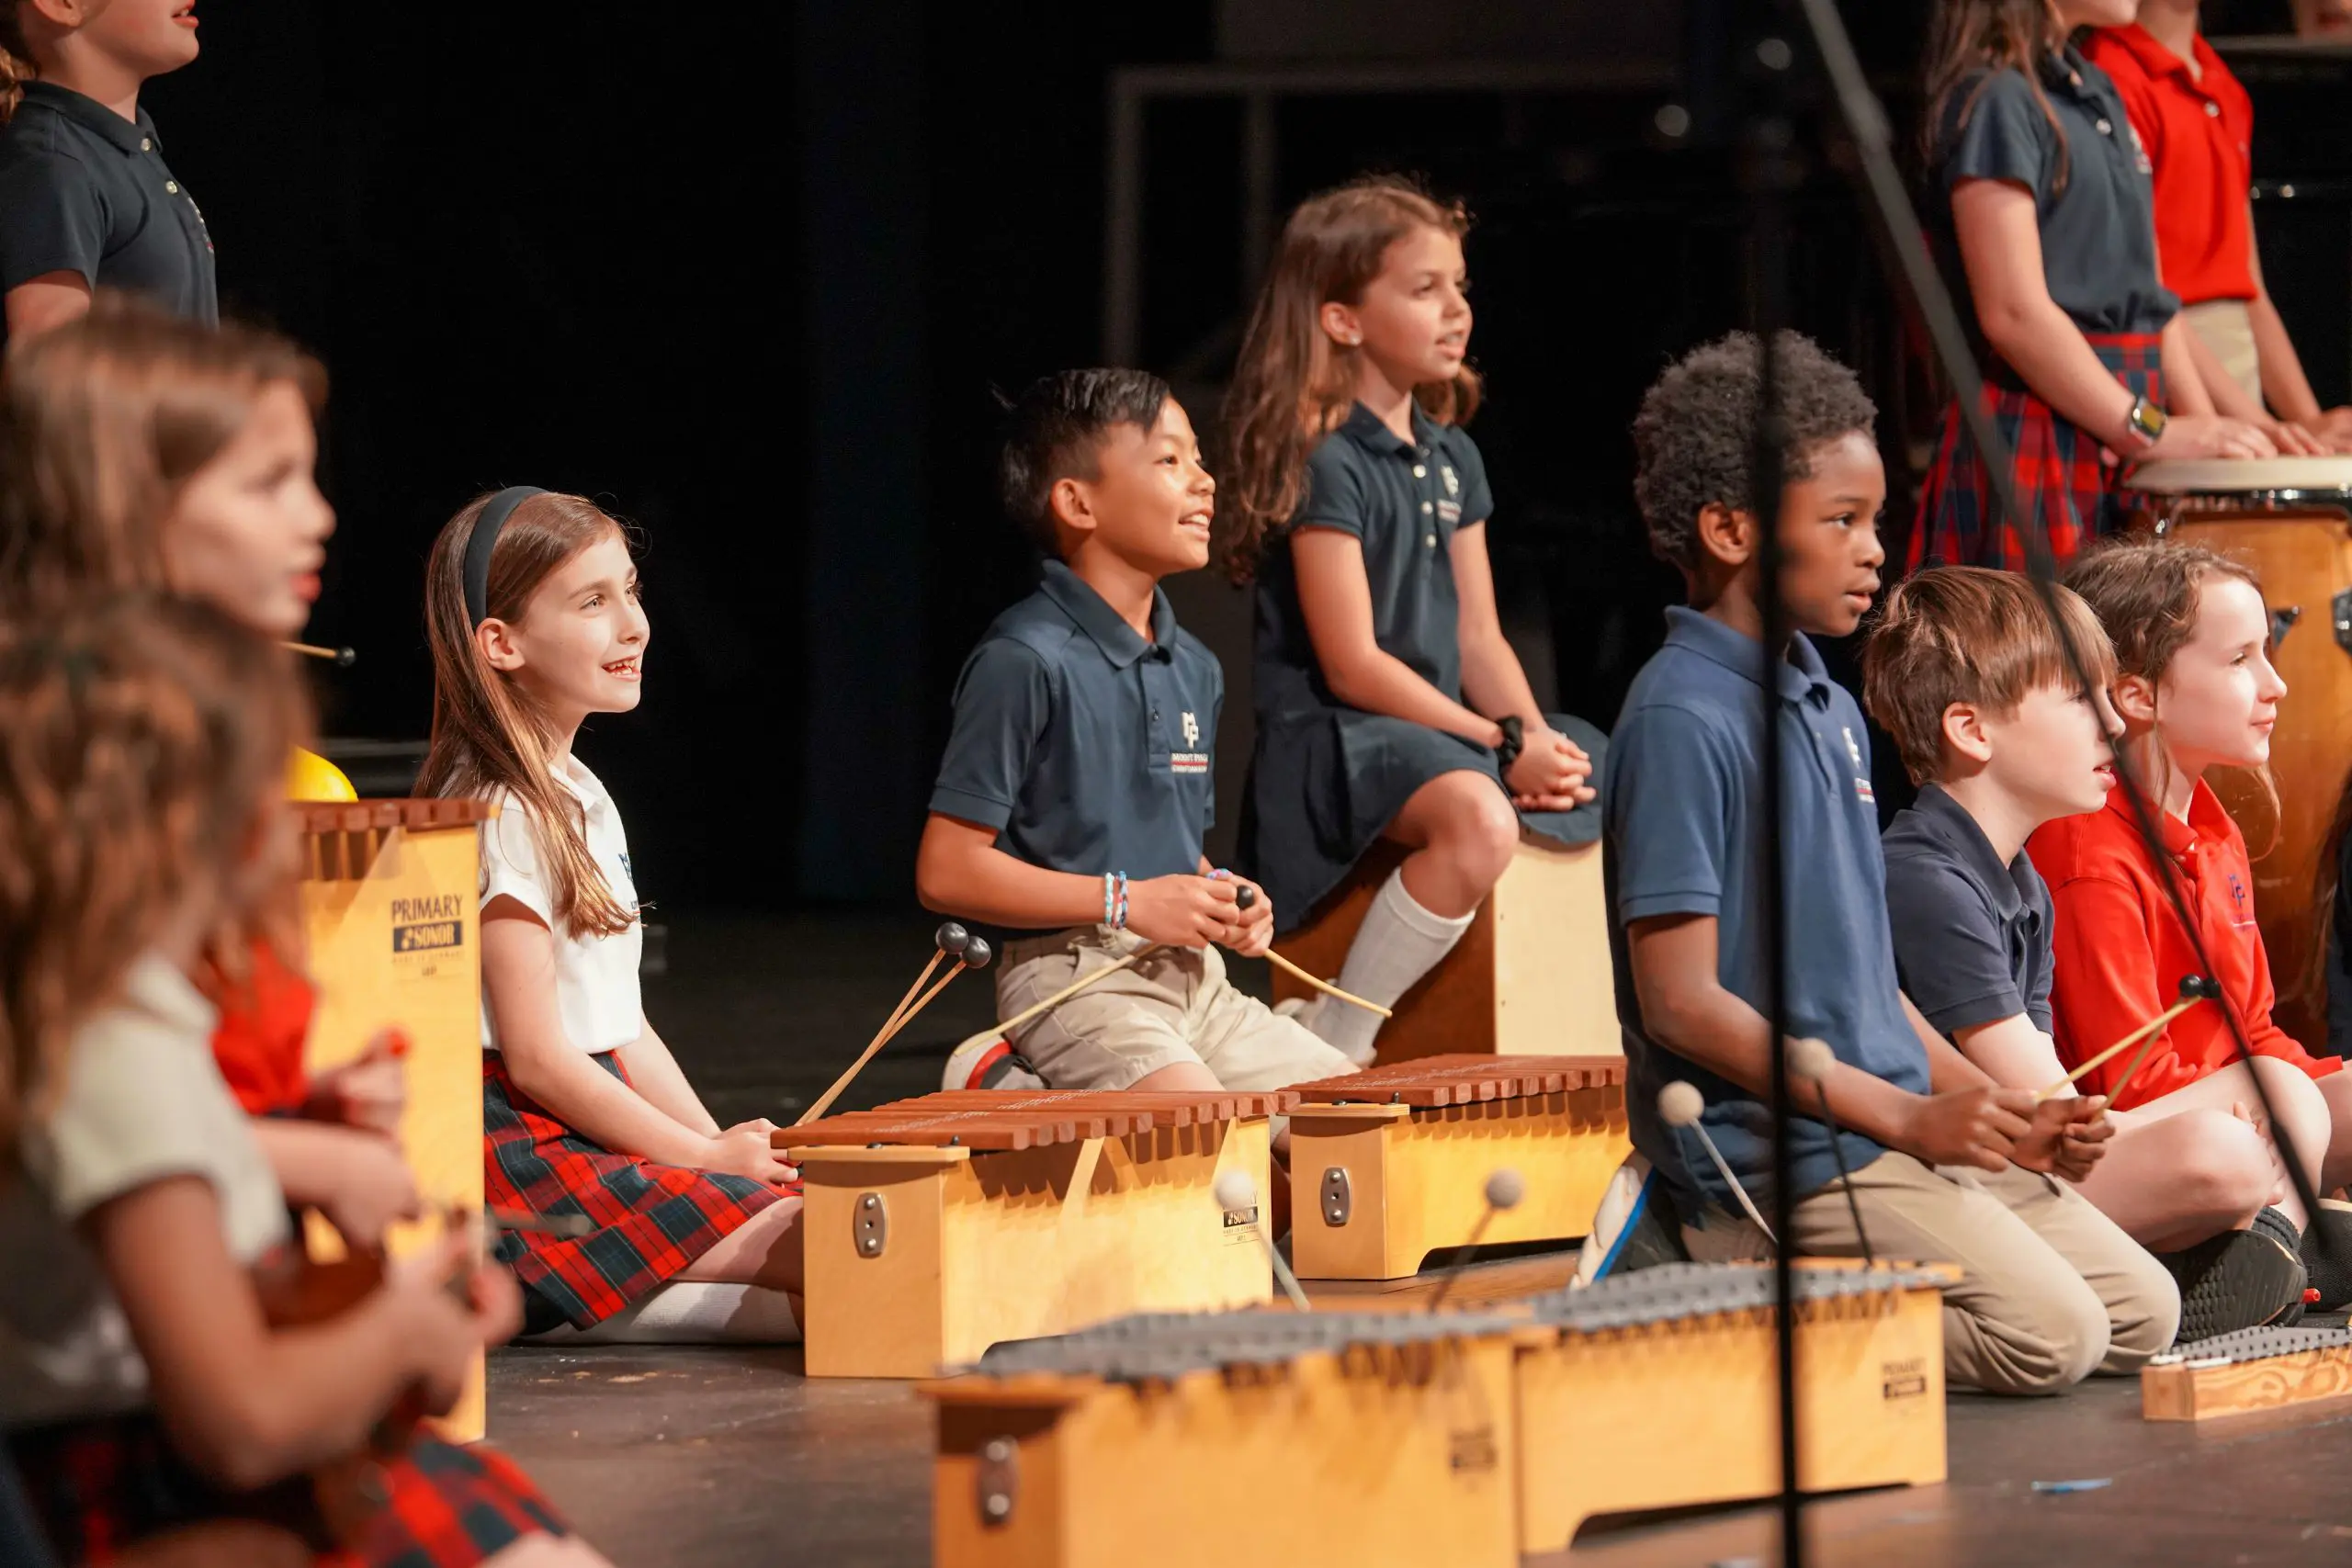 Students playing instruments onstage